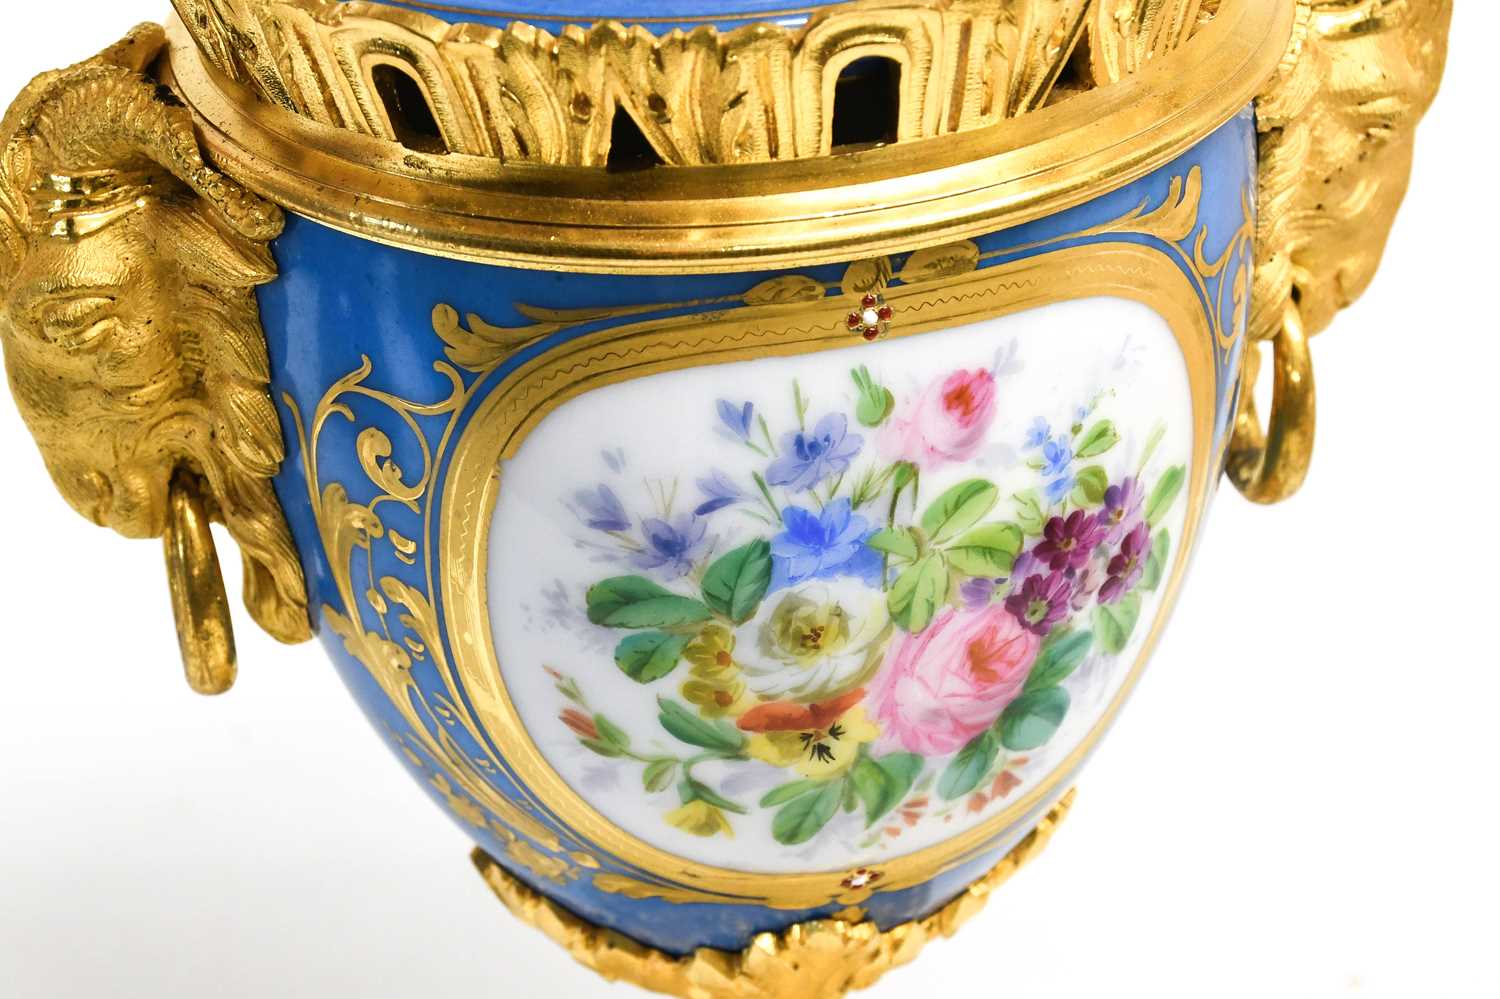 A Pair of Gilt-Metal-Mounted Sèvres-Style Porcelain Vases and Covers, 19th century, of urn shape - Bild 2 aus 3